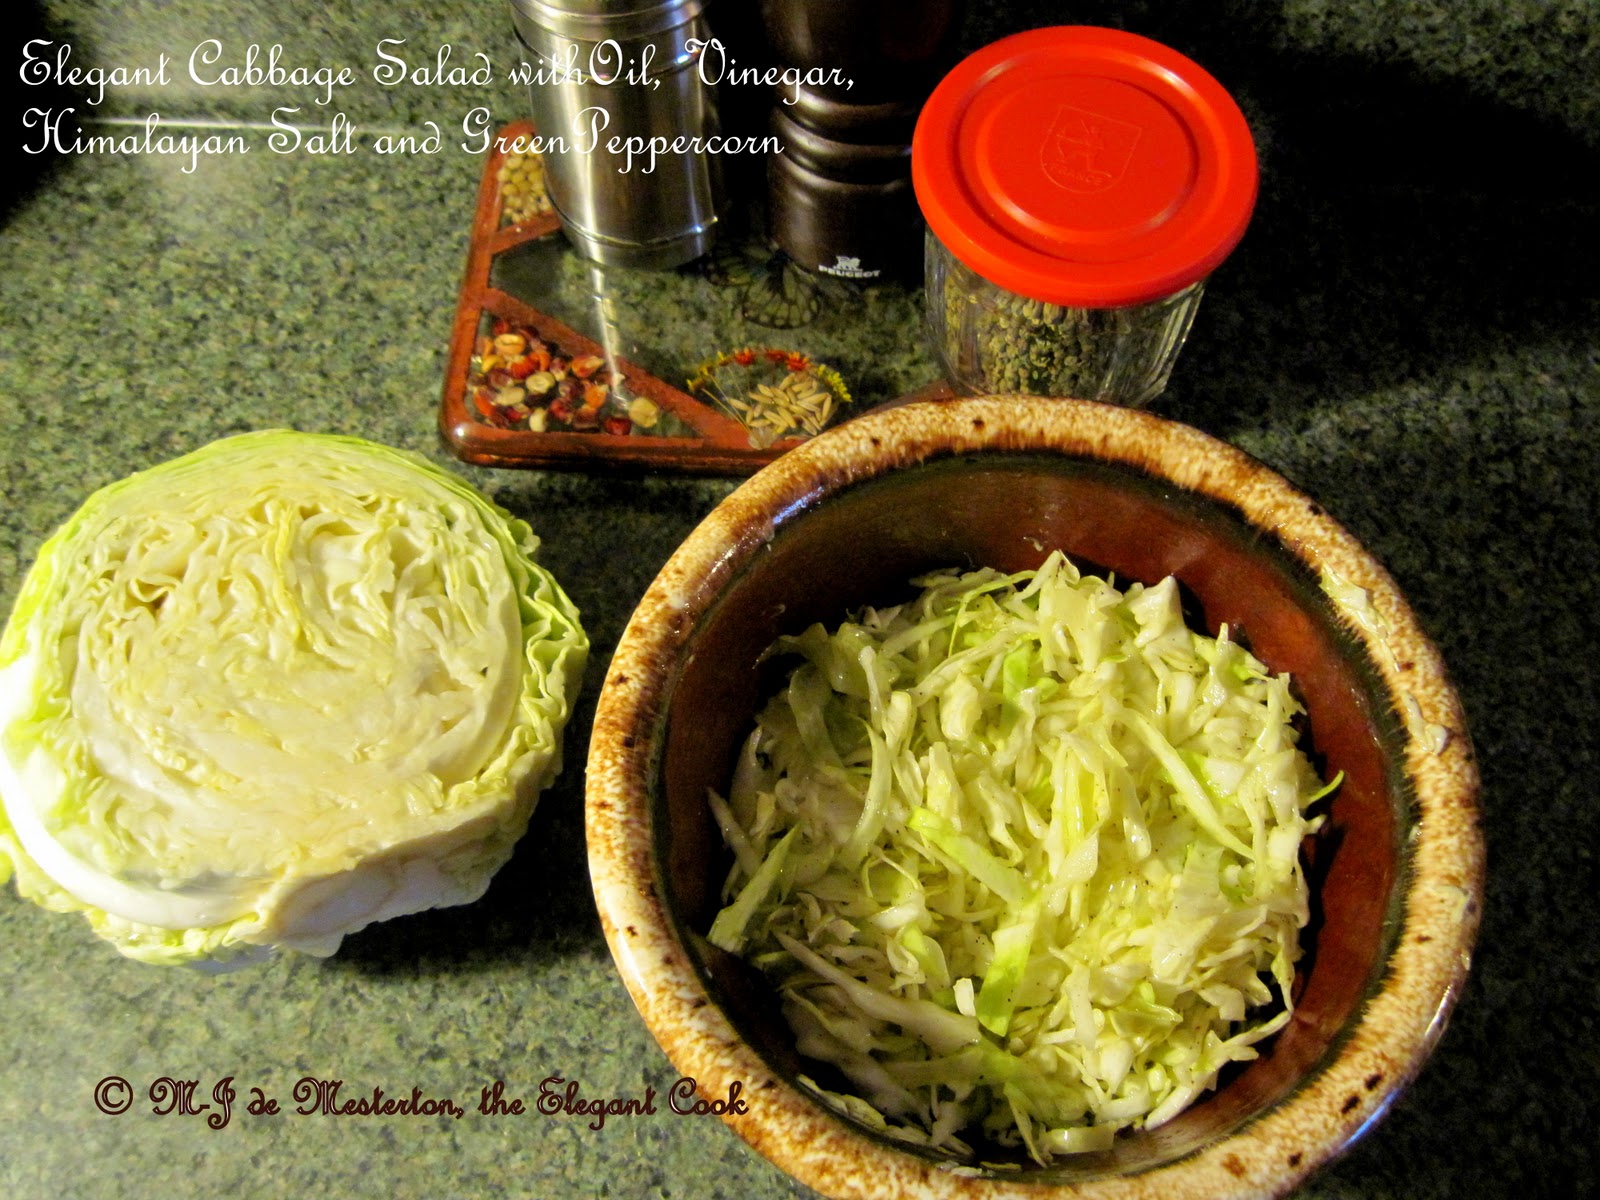 Green cabbage can be marinated in a salad European-style, stuffed as c 